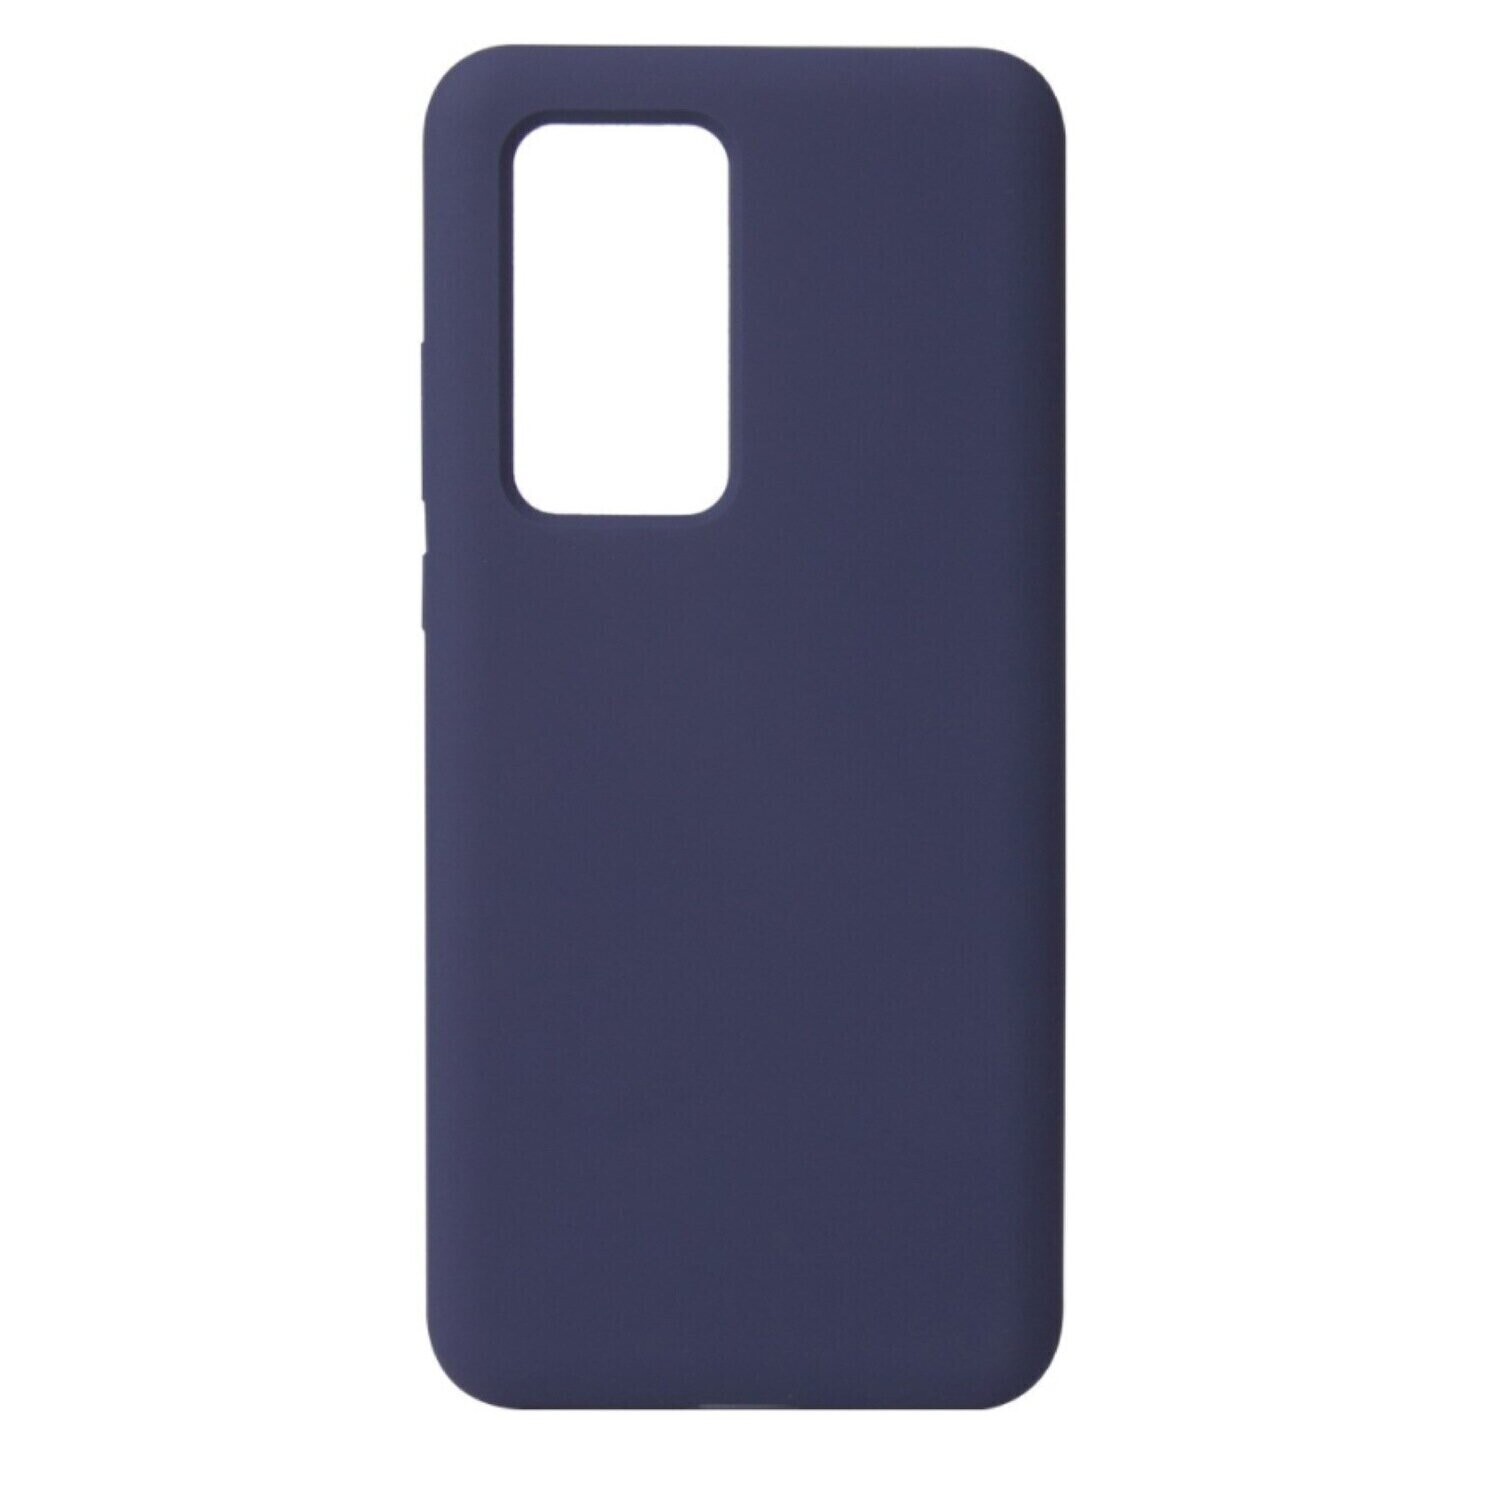 Komass Huawei P40 Pro Liquid Silicone Back Cover, Blue